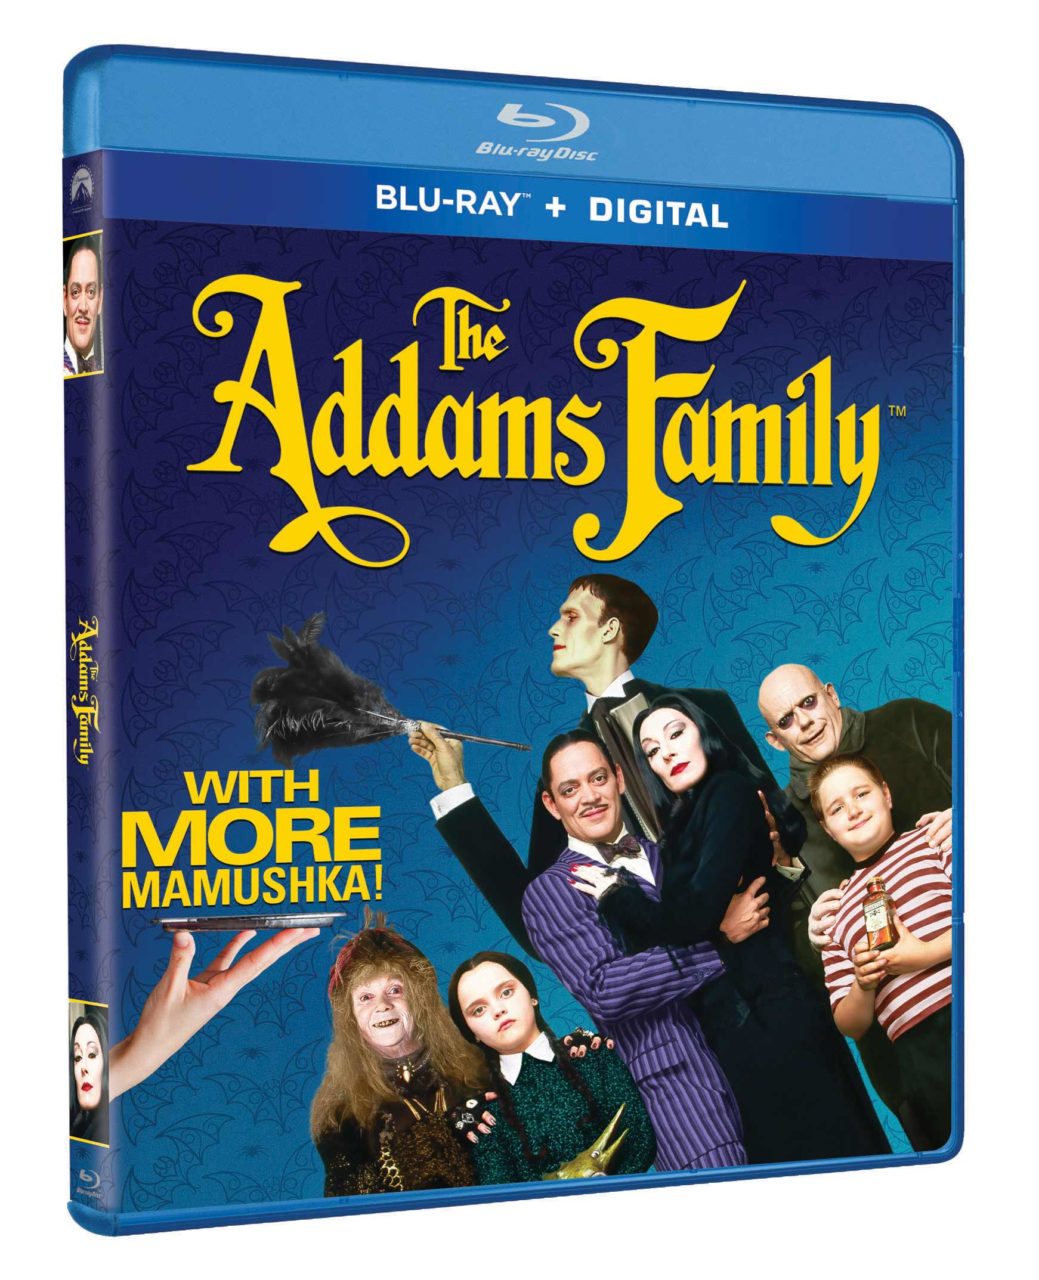 The Addams Family Blu-Ray Combo Pack cover (Paramount Home Entertainment)